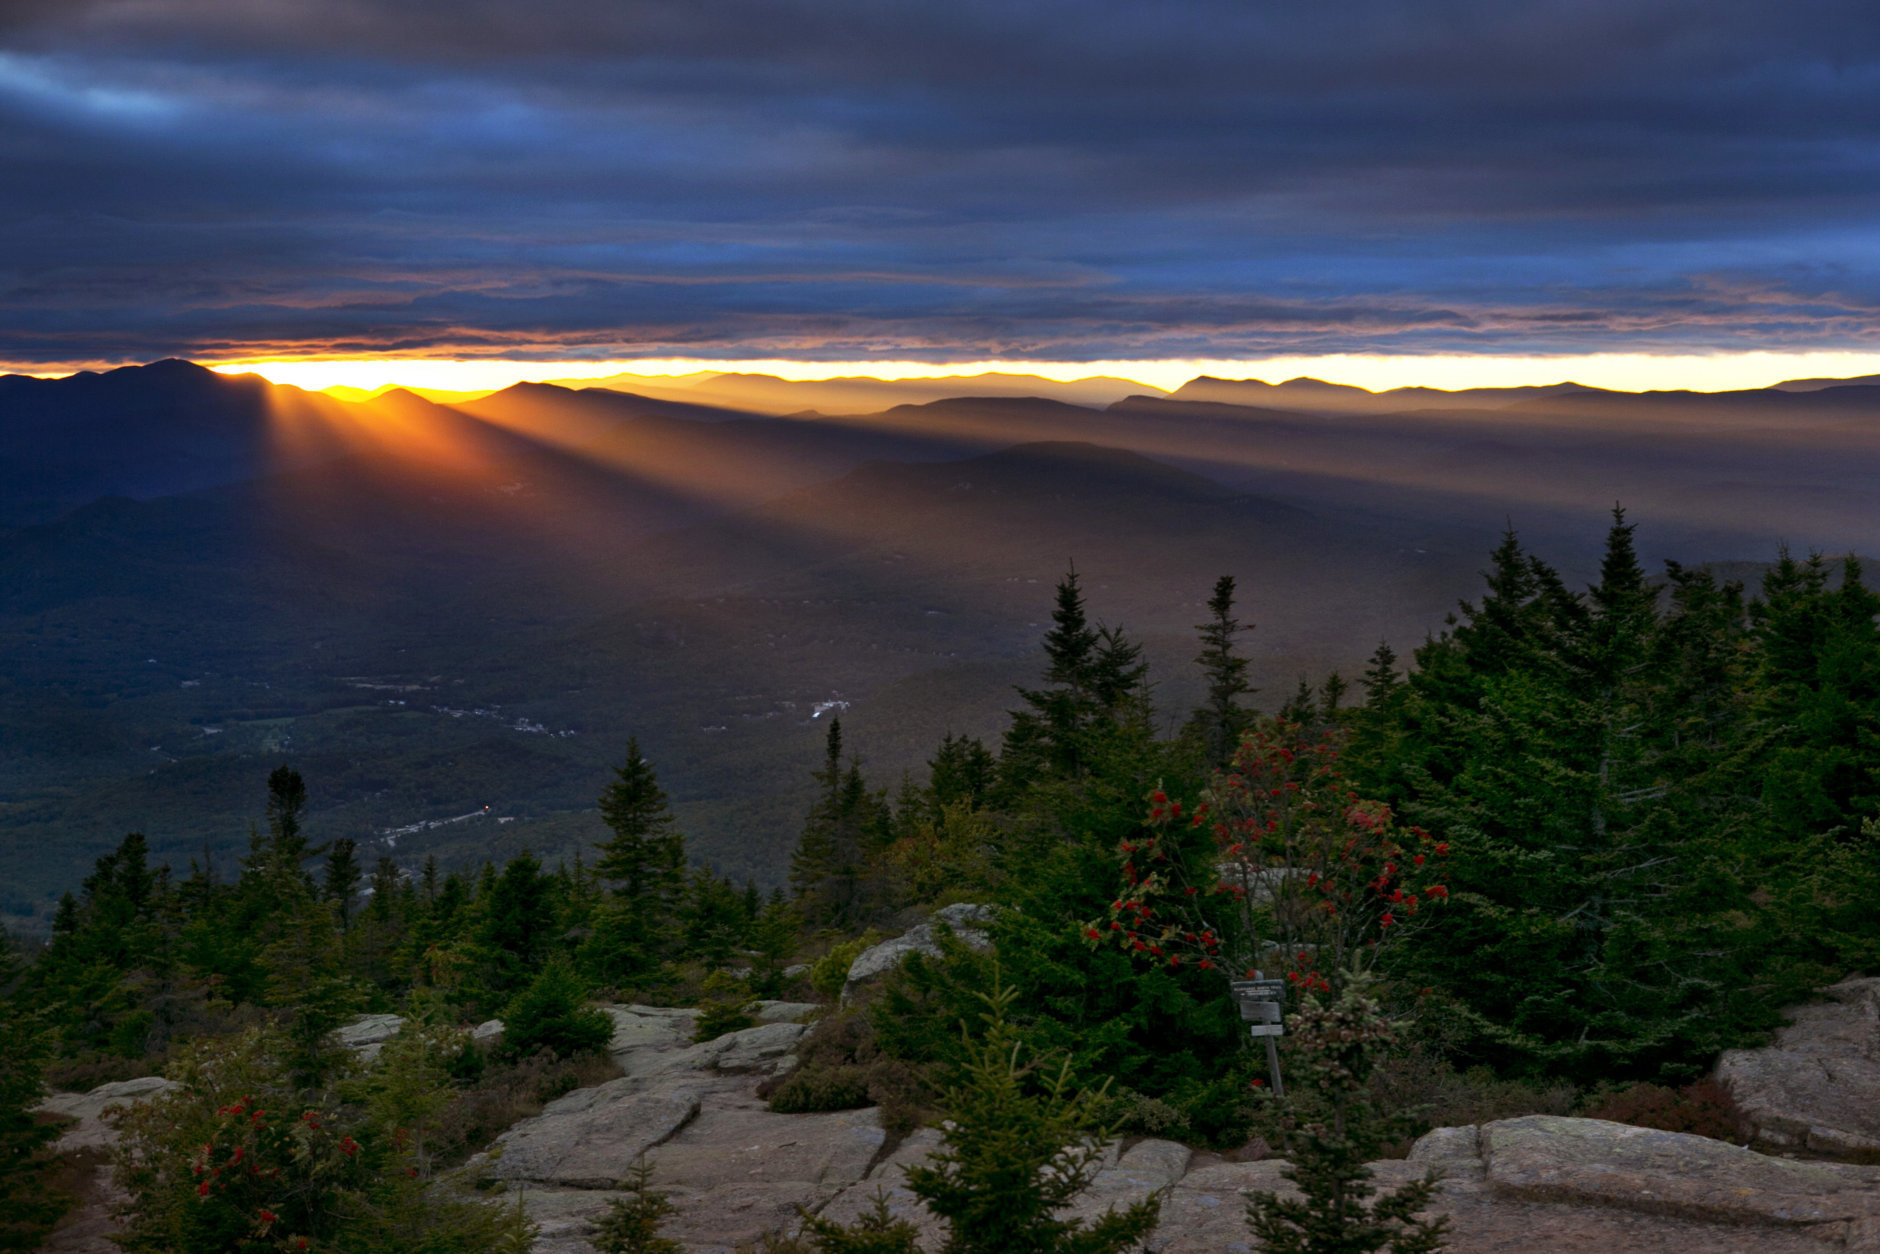 Sun rays spill through a gap between the clouds and the White Mountains as the skies begin to clear above Bartlett, N.H., Friday, Sept. 22, 2017. The first weekend of autumn is expected to be unusually warm with temperatures expected to reach the upper 80s. (AP Photo/Robert F. Bukaty)